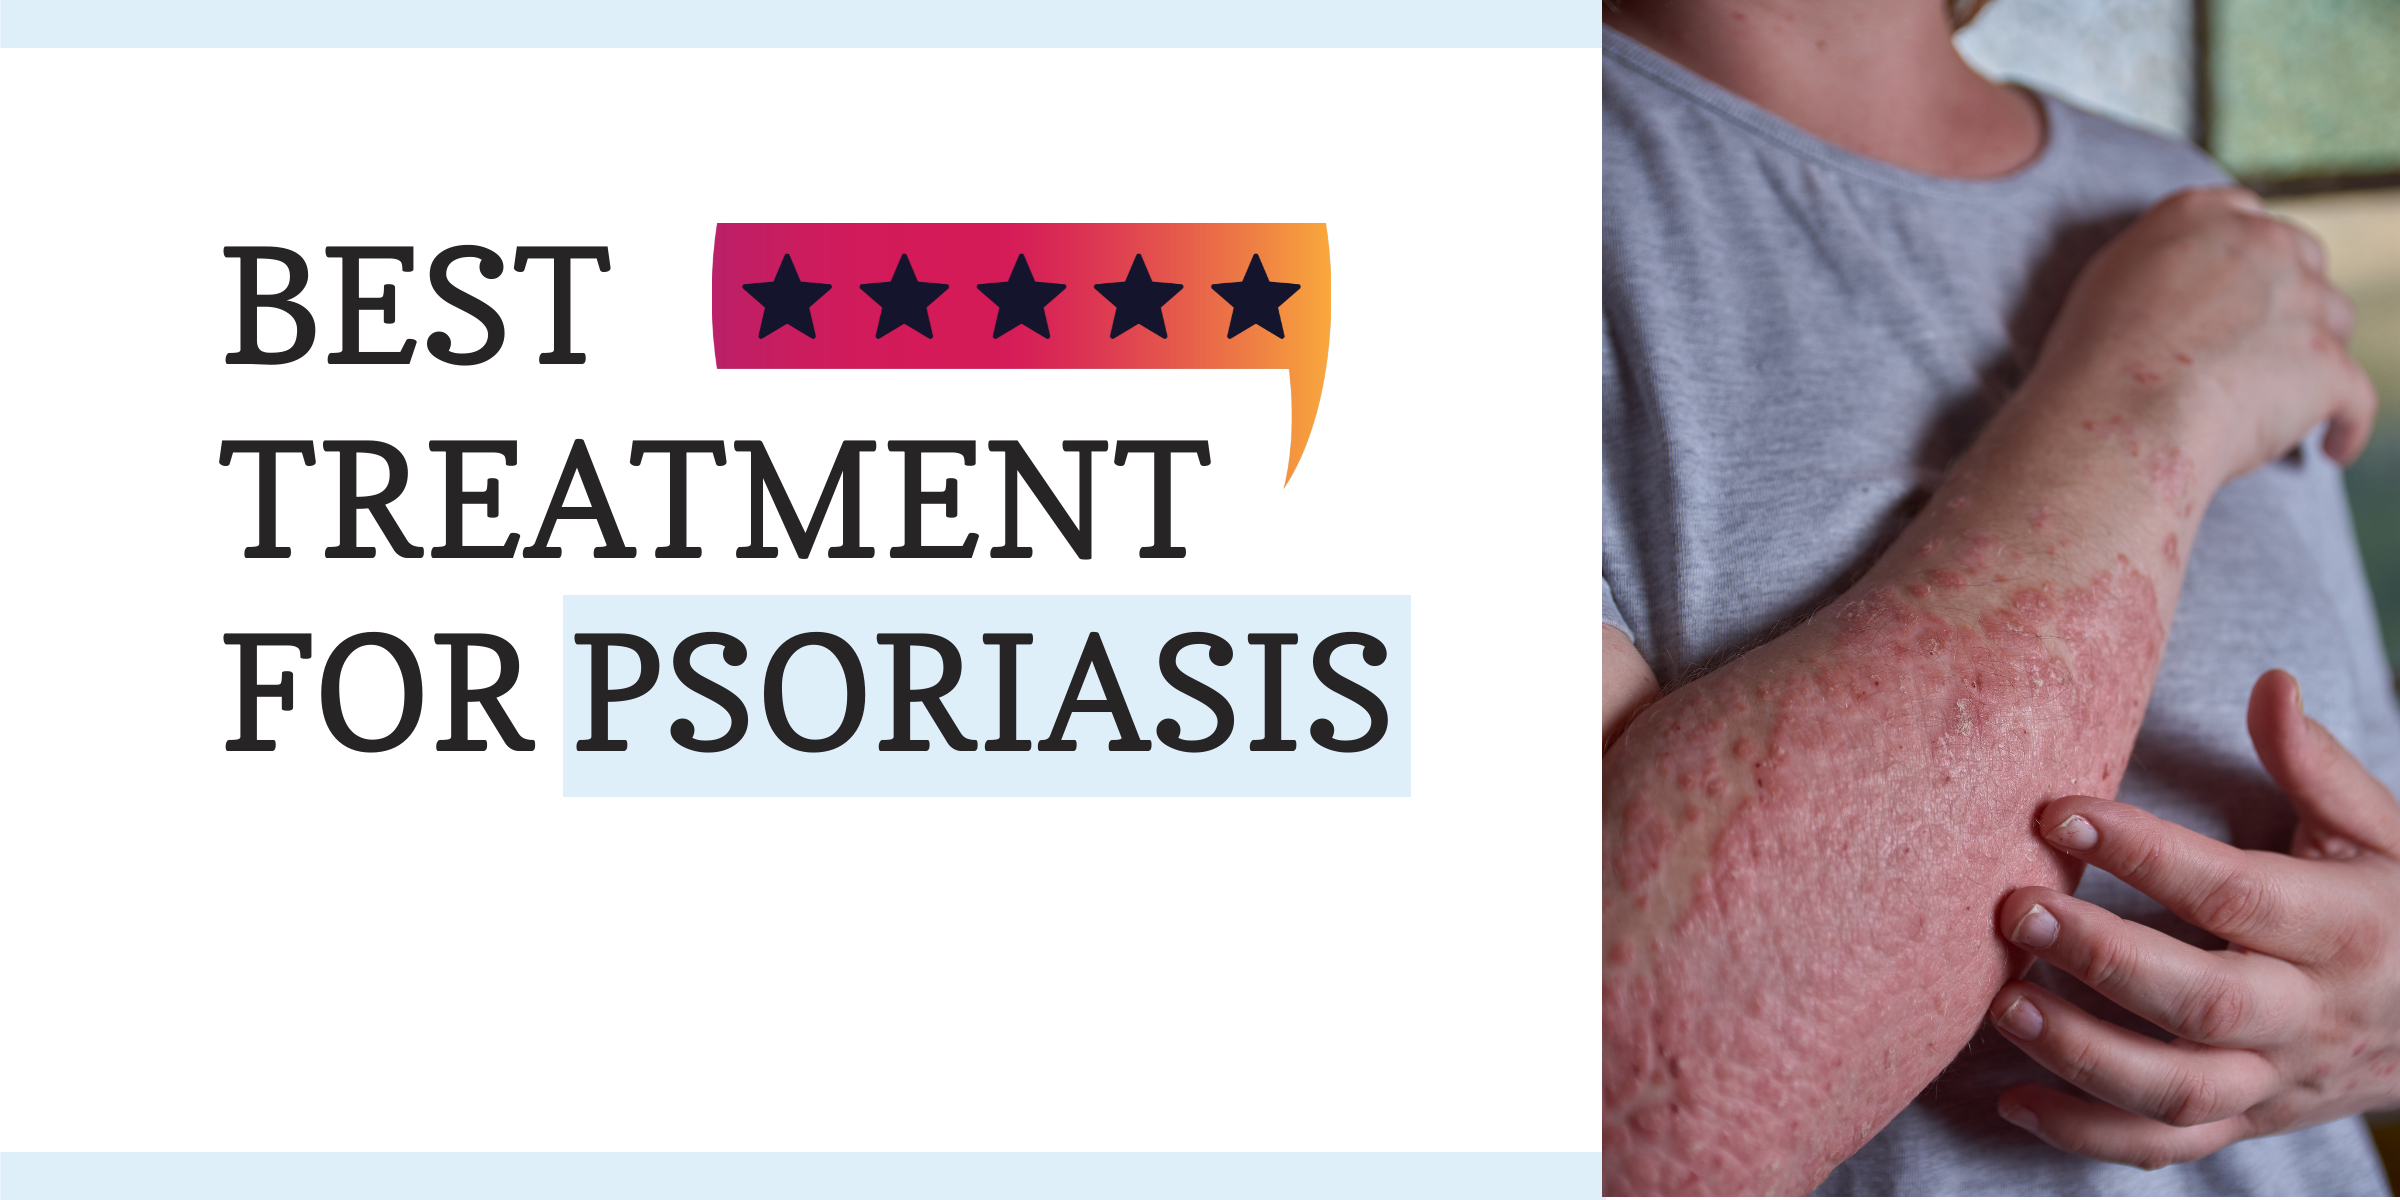 Best Treatment for Psoriasis